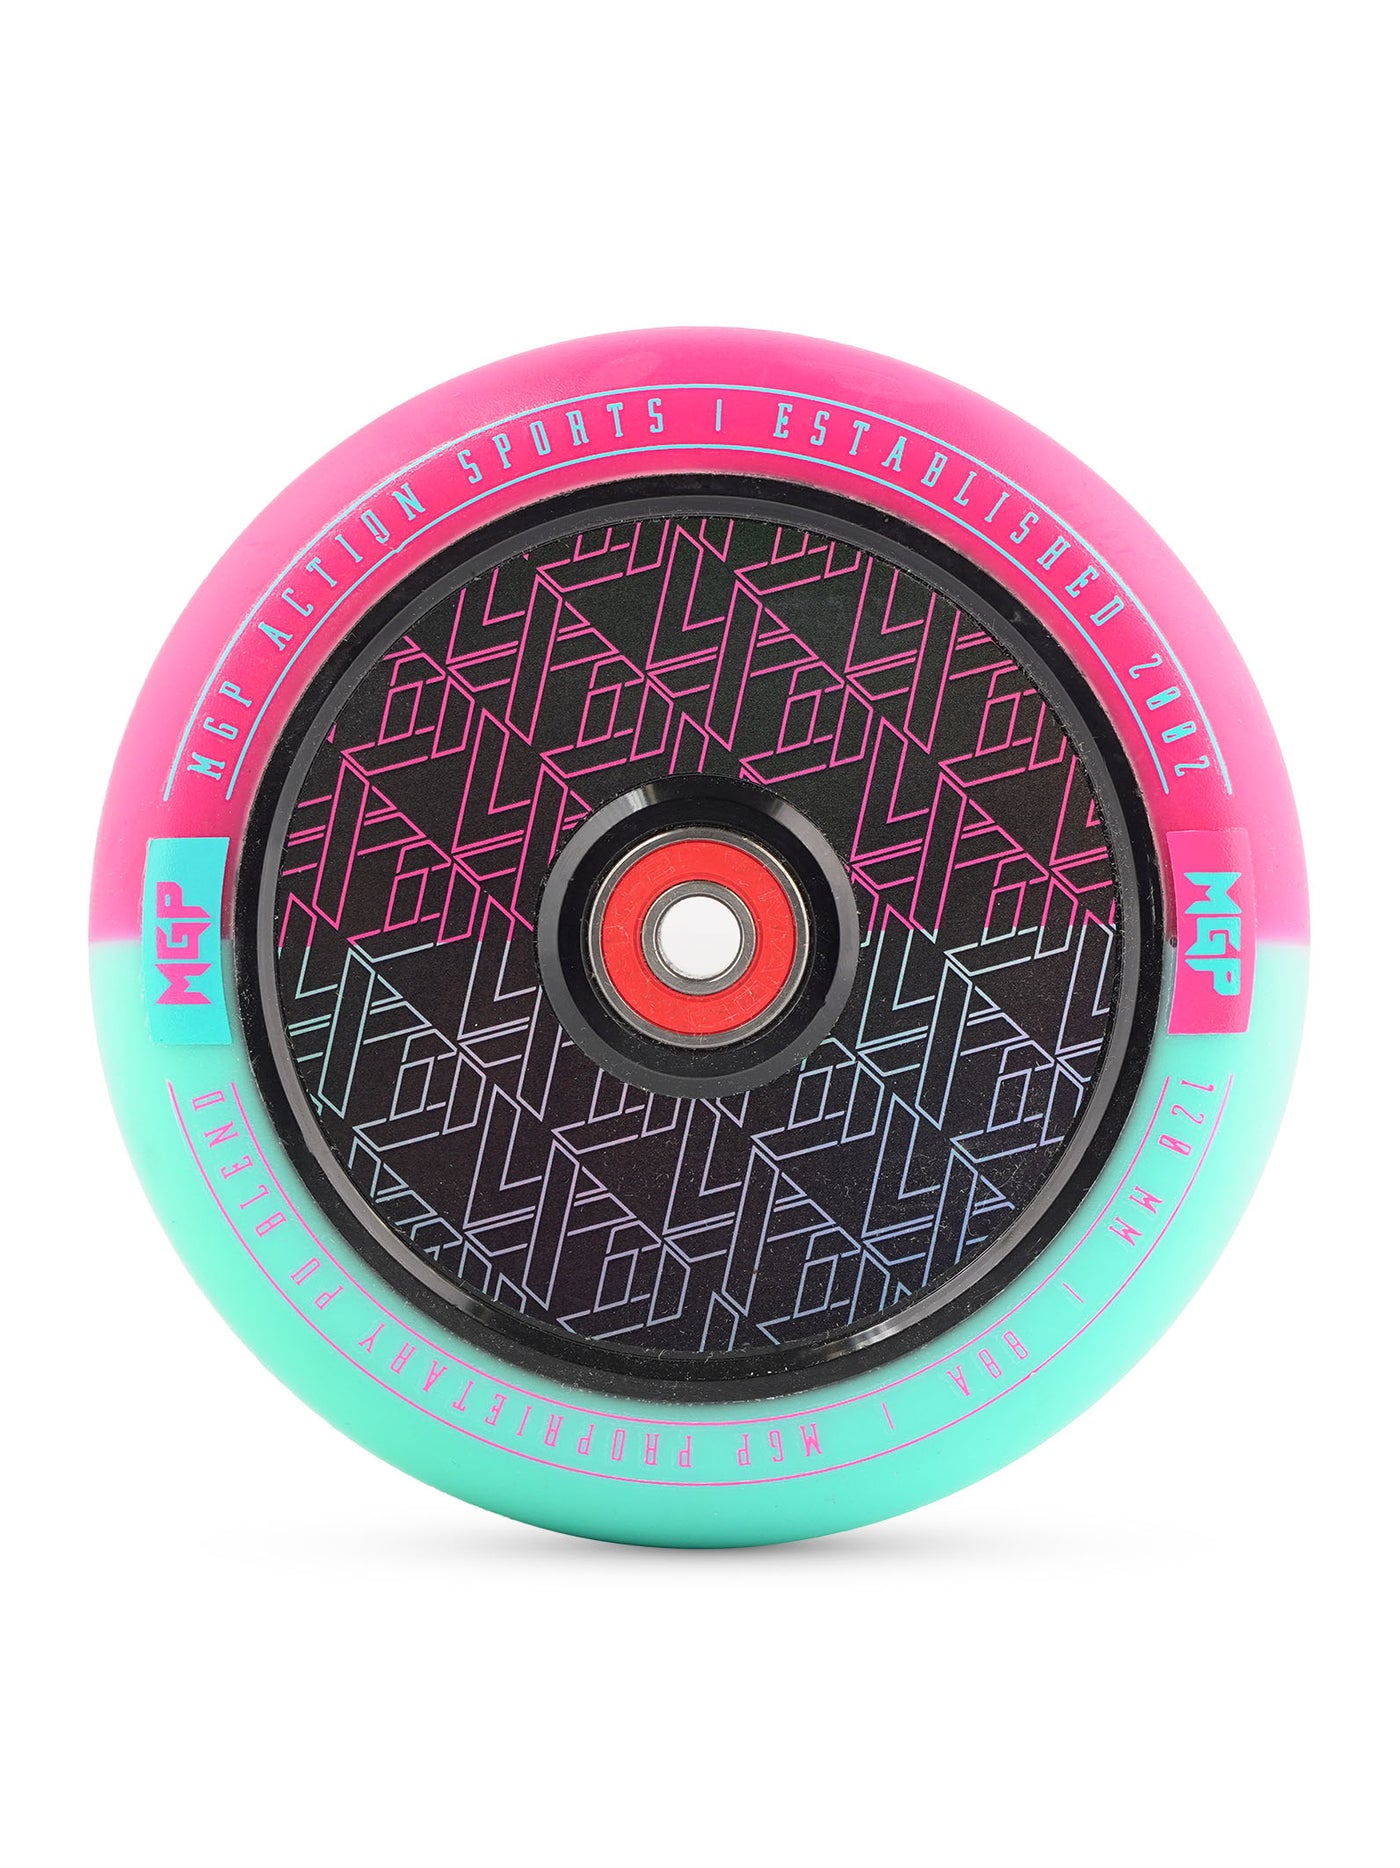 MFX mgp madd gear pro scooter wheel corrupt hollow core alloy aluminum metal stunt trick replacement pink teal